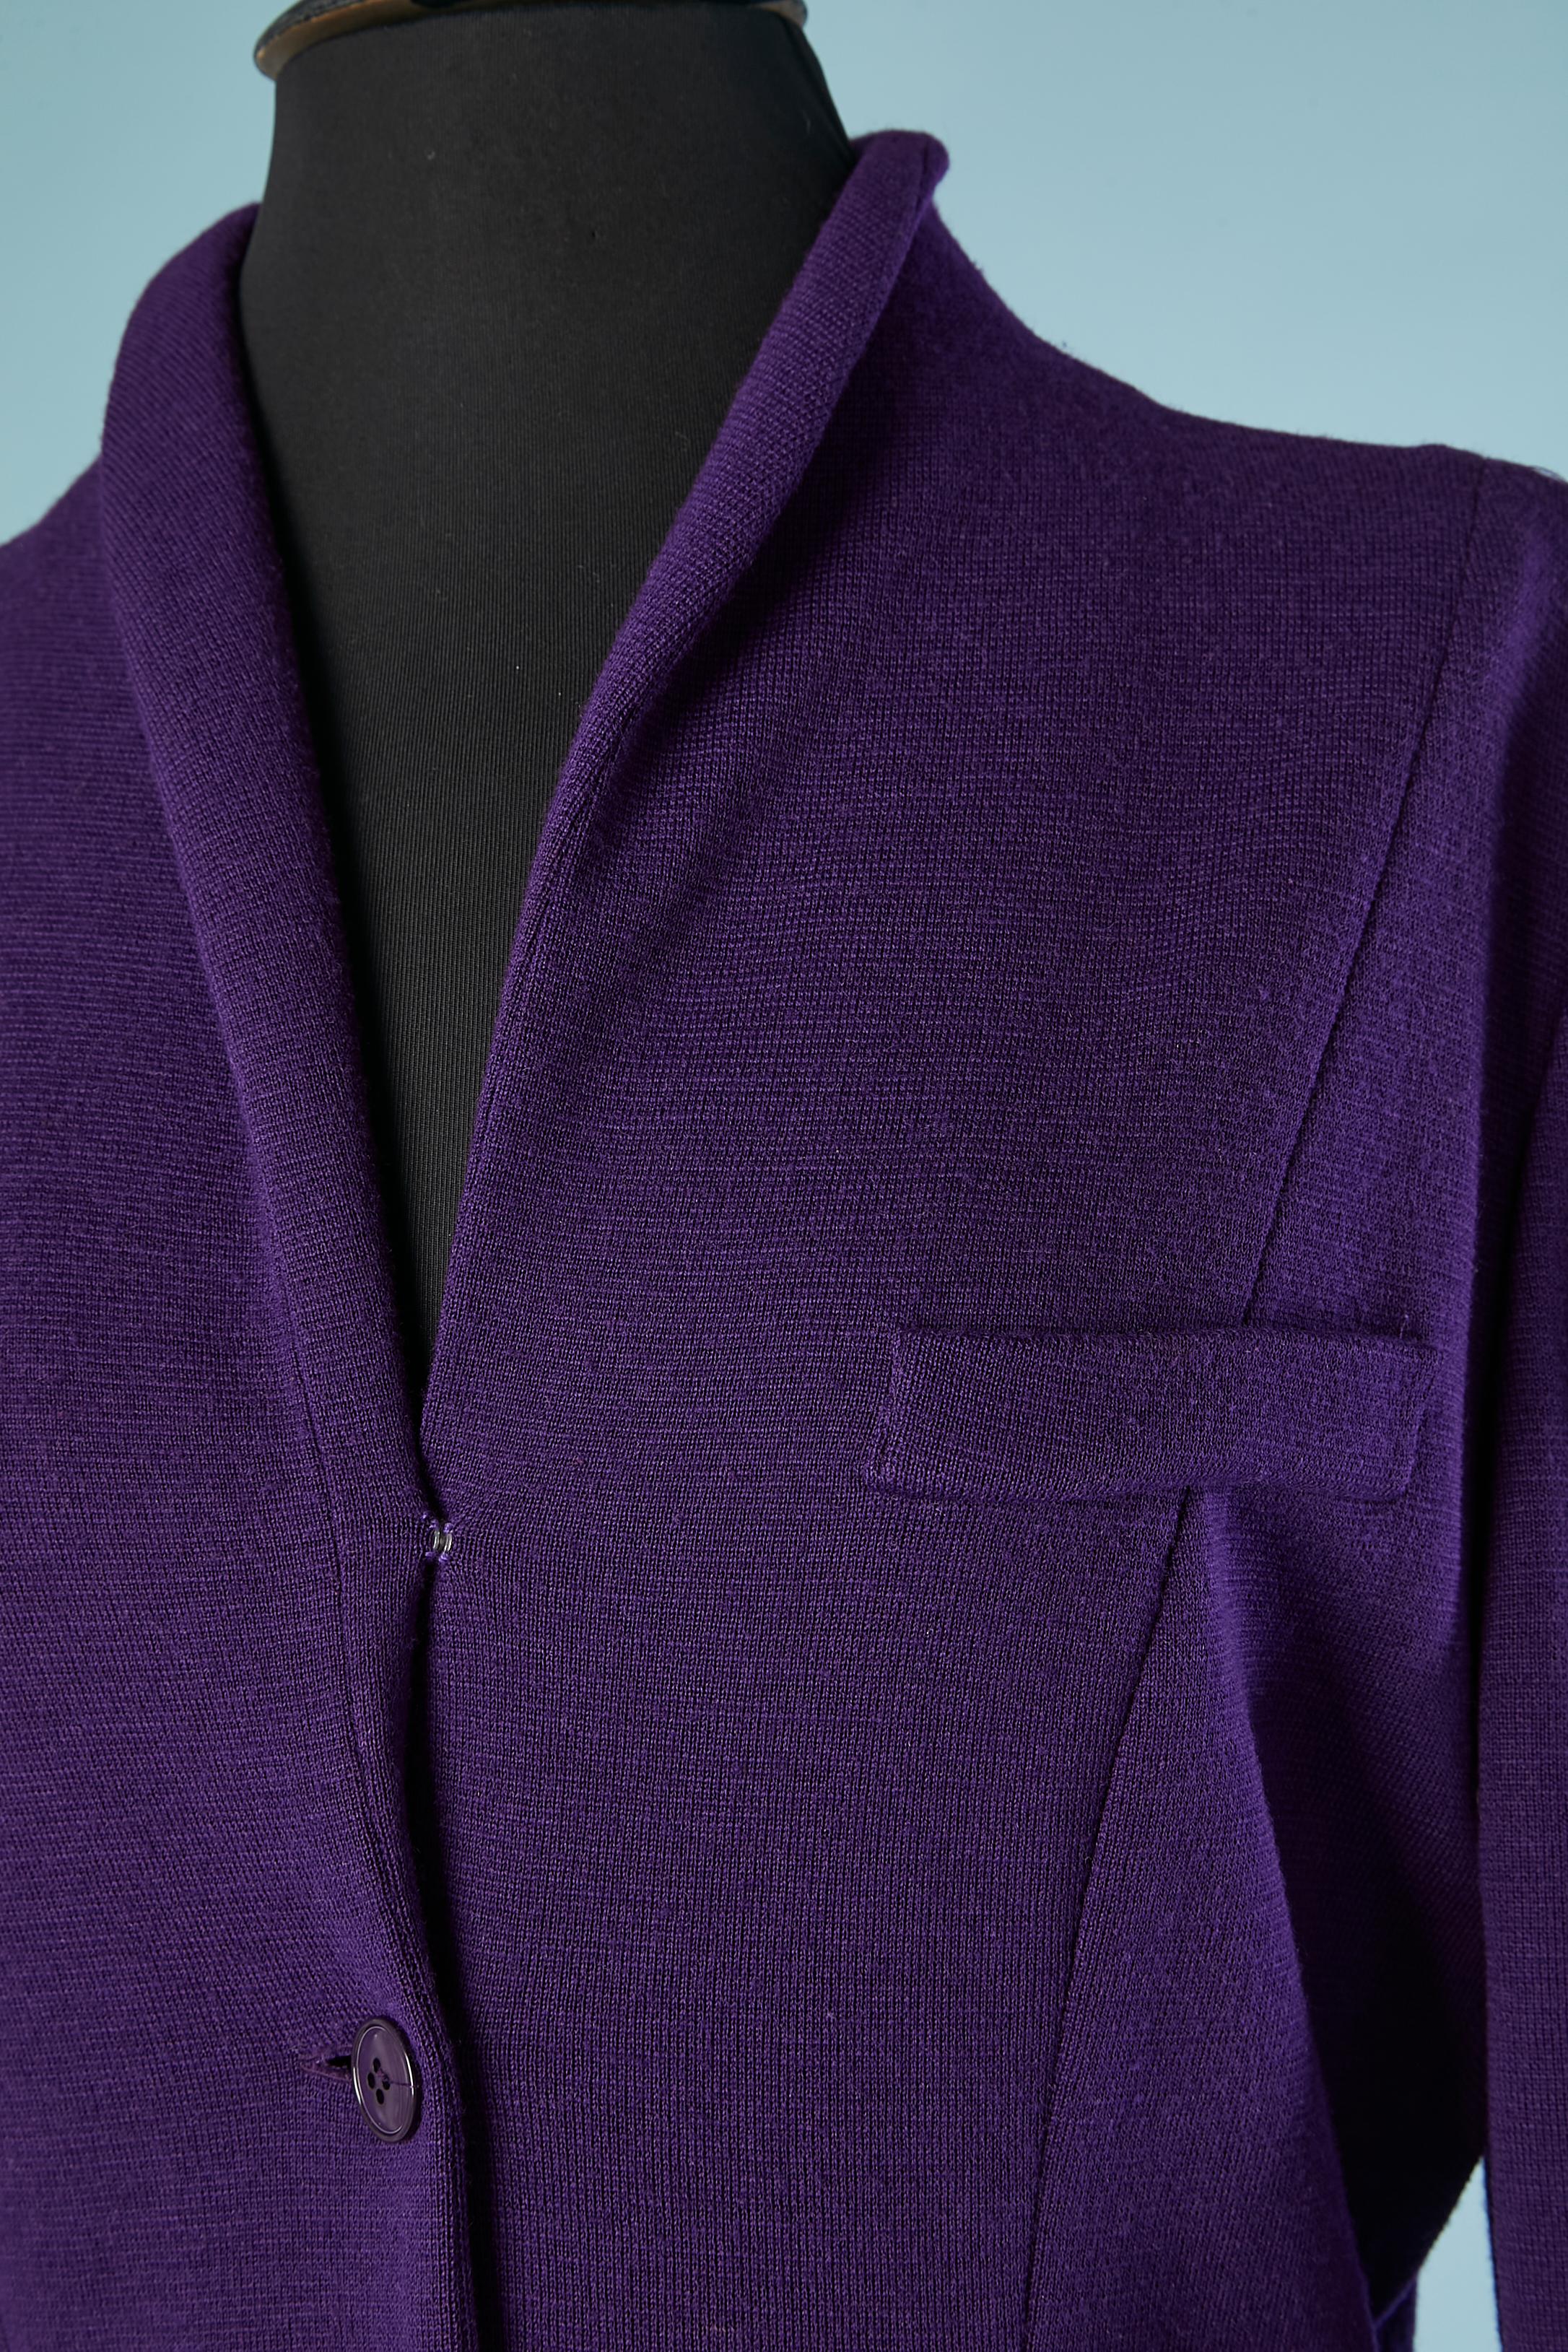 Purple wool jersey dress. Button and buttonhole in the middle front + one plastic snap on the middle top ( above the top button) 
2 pockets on the side of the hips + one 